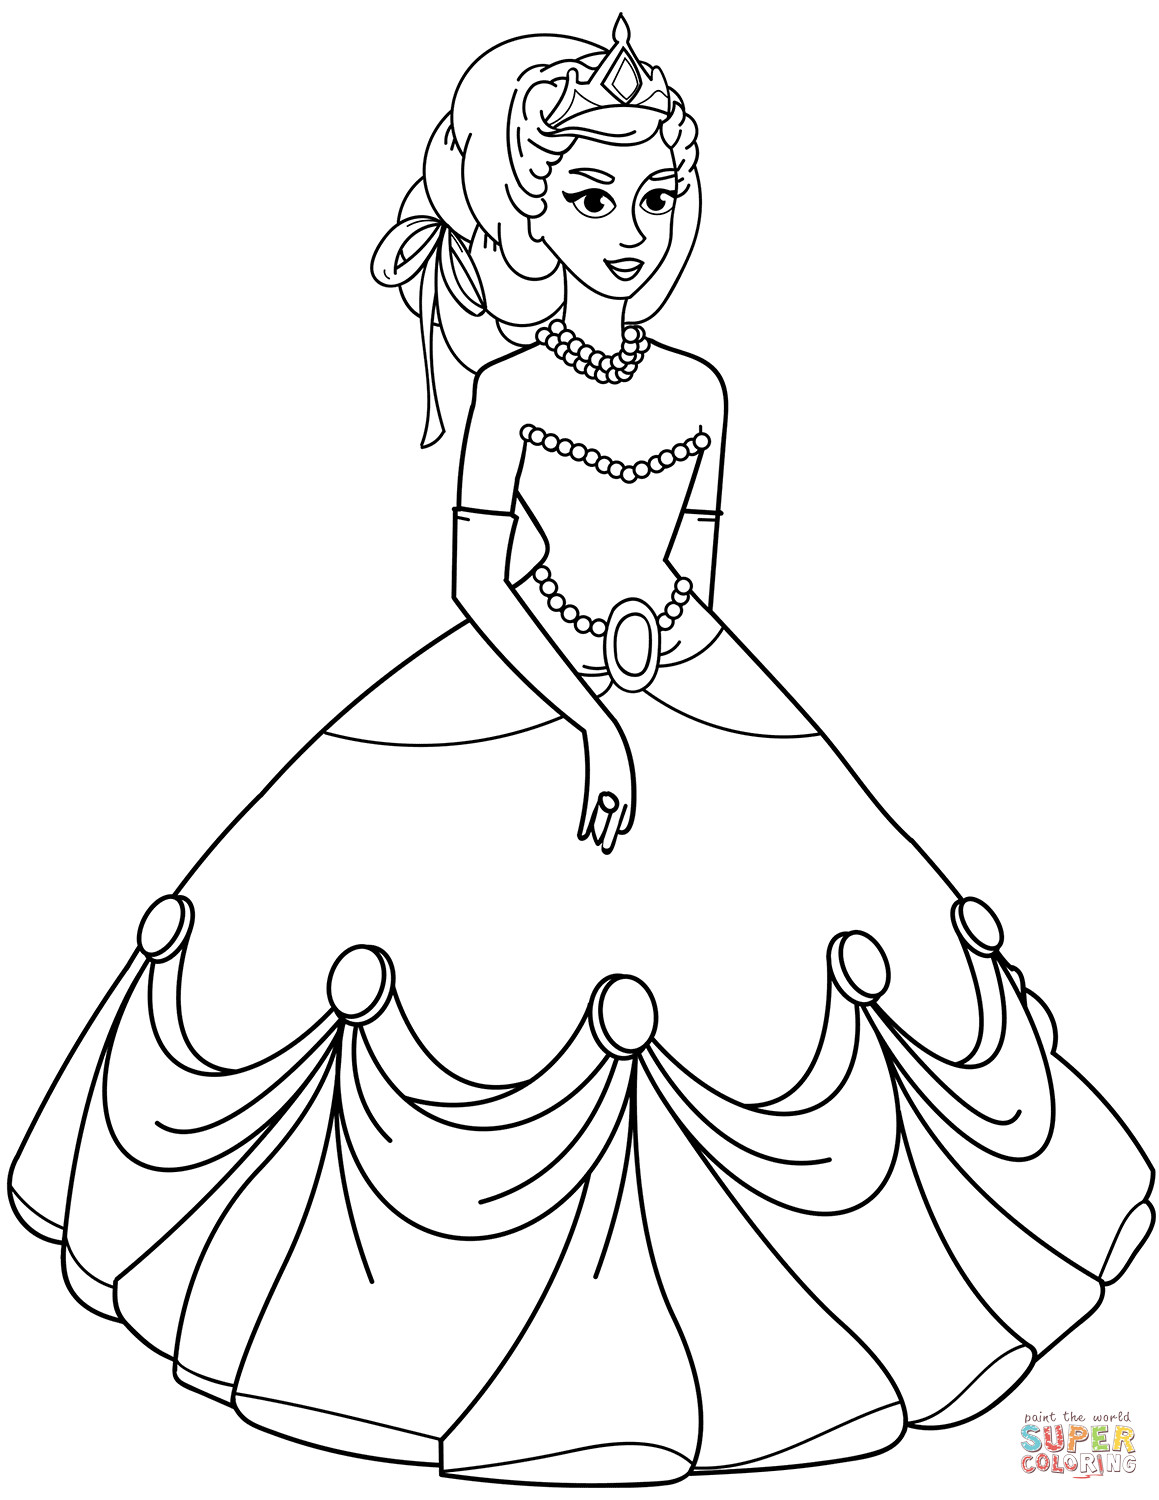 Princess Coloring Books For Girls
 Princess in Ball Gown Dress coloring page